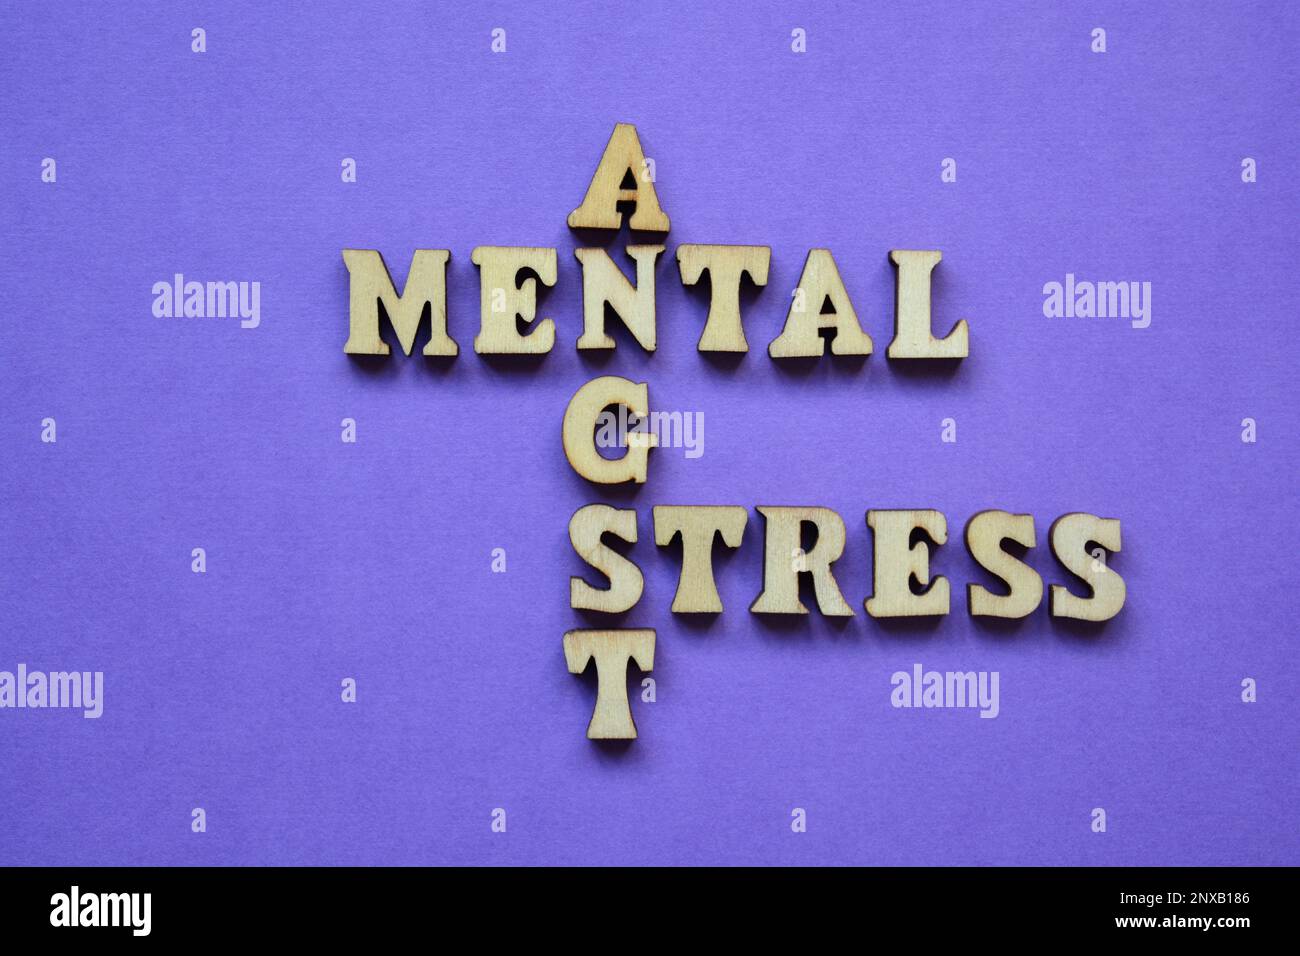 Mental, Stress, Angst, words in wooden alphabet letters in crossword form isolated on purple background Stock Photo